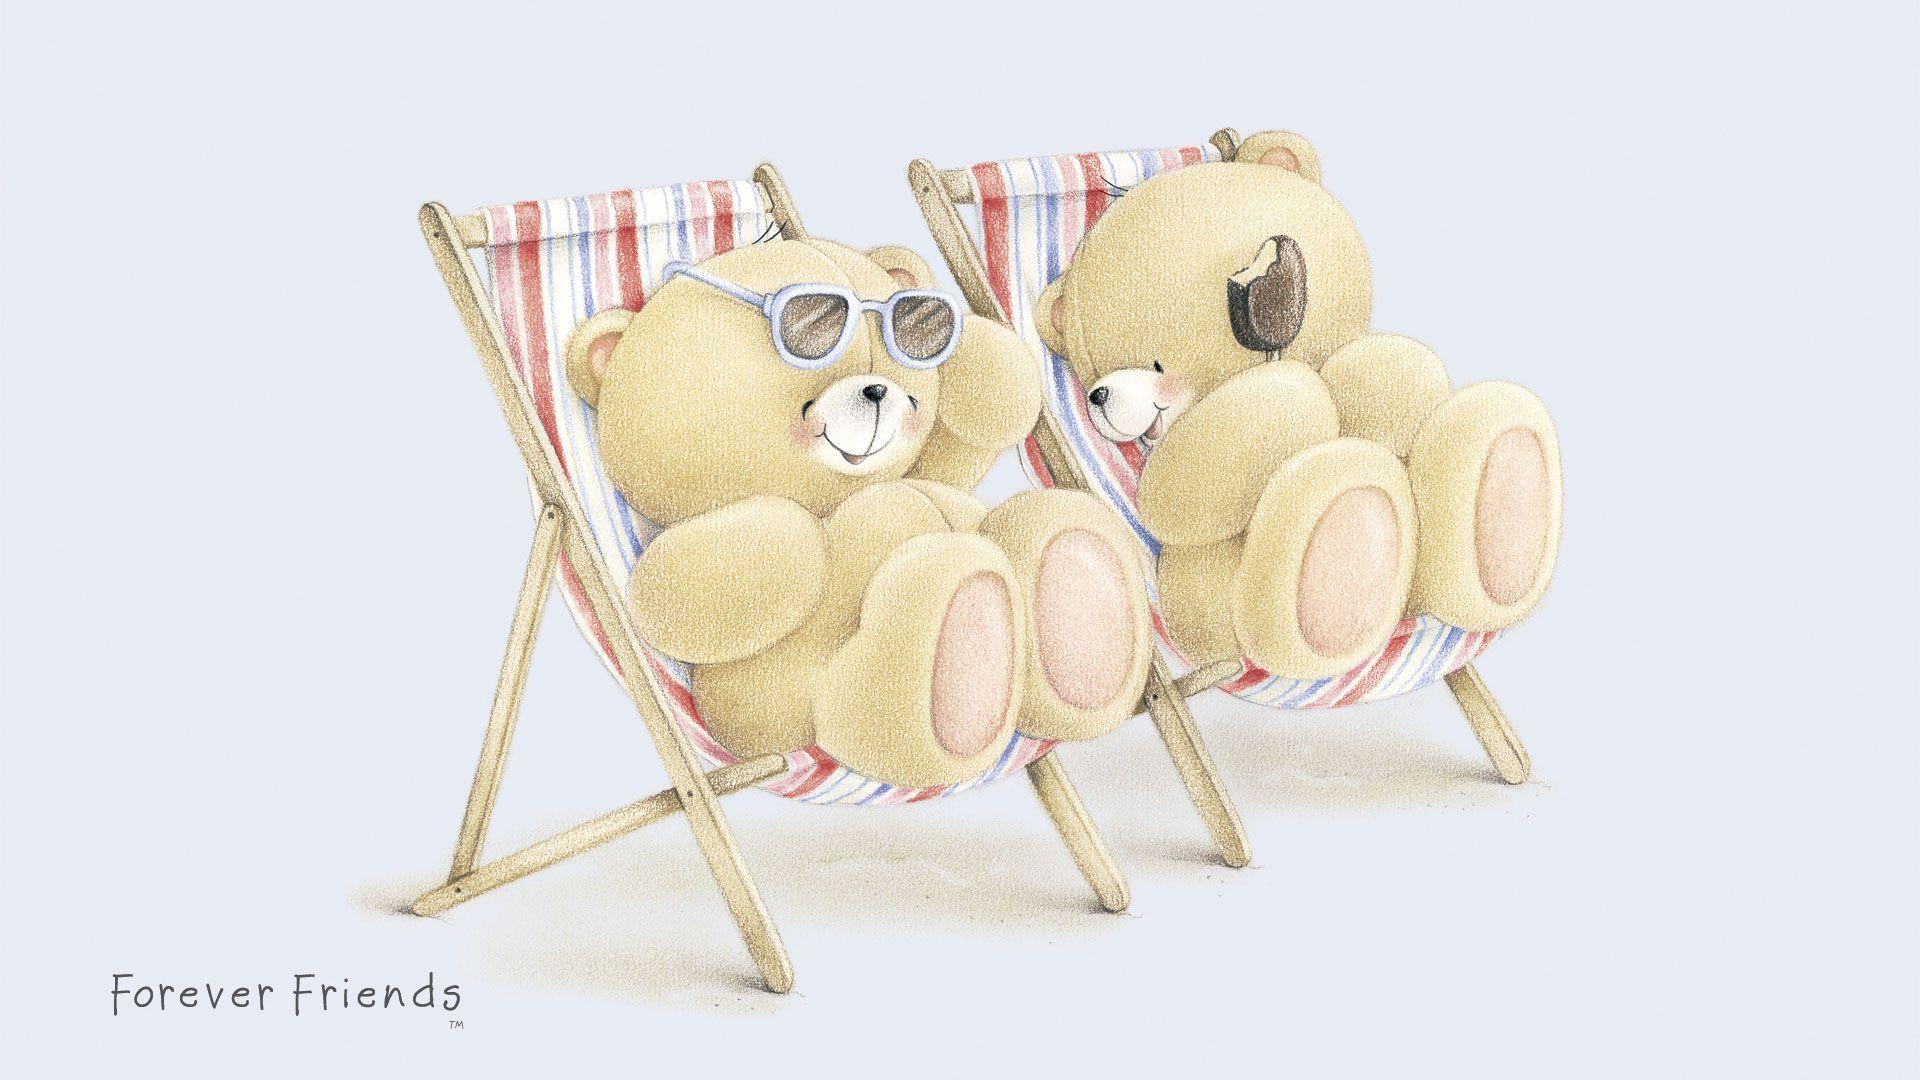 Forever Friends. Forever Friend Bear collection